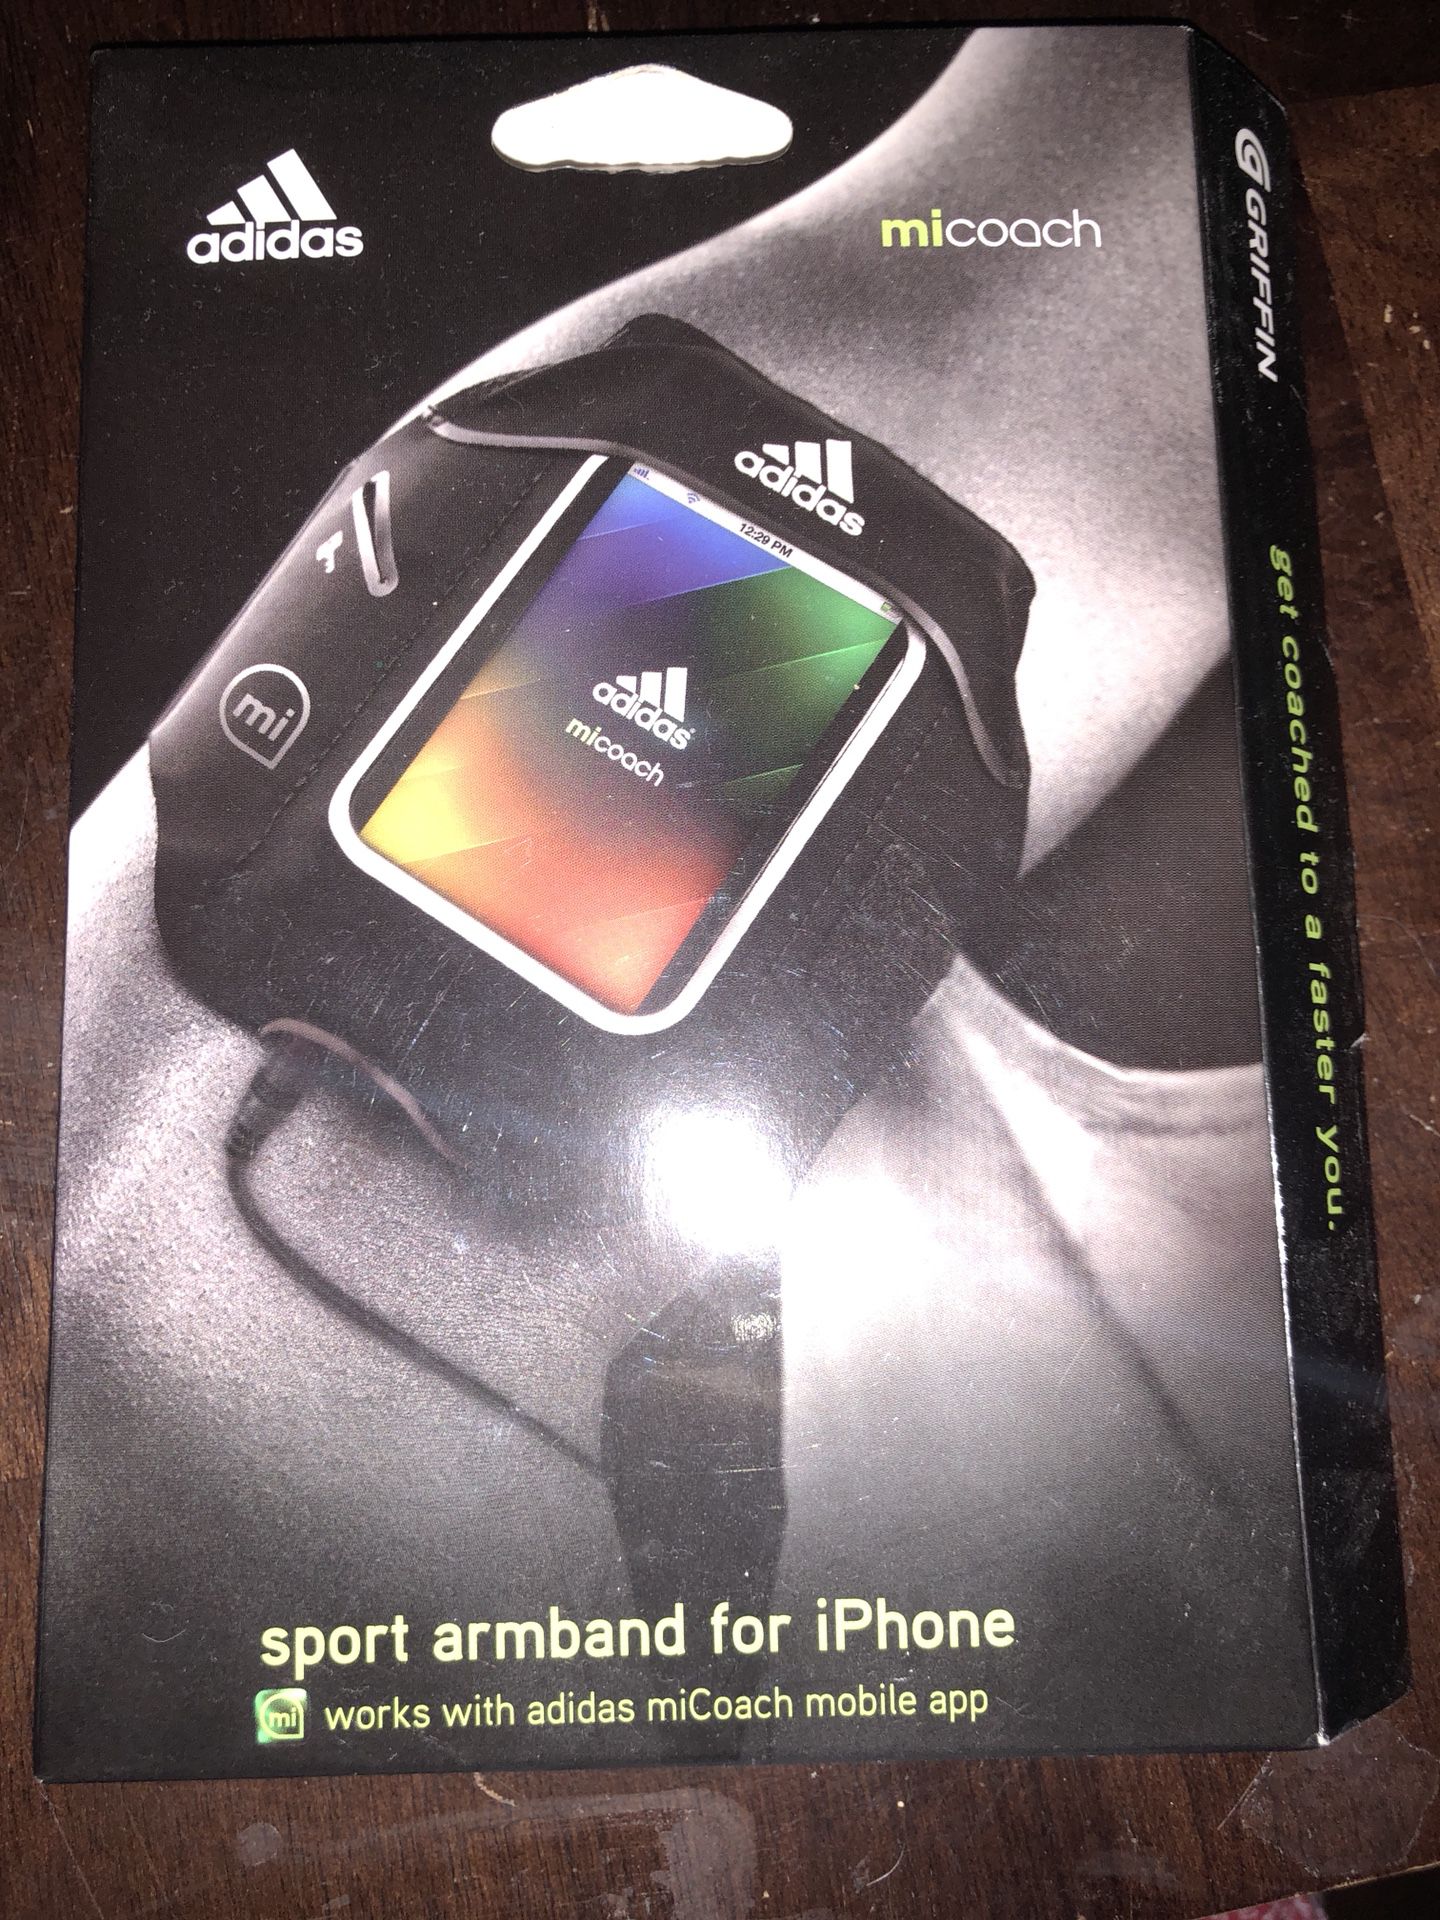 New Adidas arm band for iPhone 5